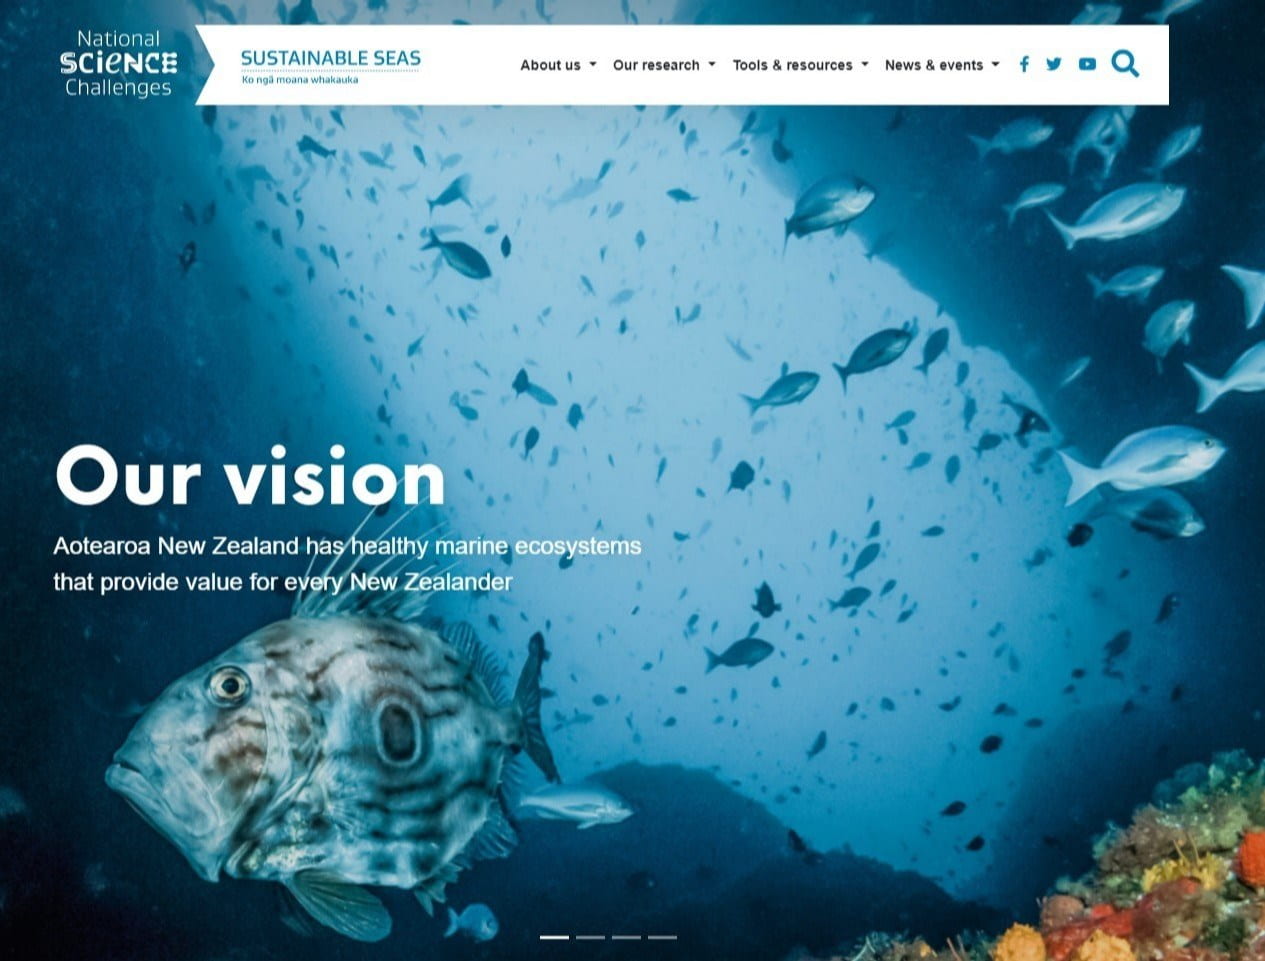 Screengrab of the Sustainable Seas website with a picture of a fish and the words "Our vision: Aotearoa New Zealand has healthy marine ecosystems that provide value to every New Zealander"